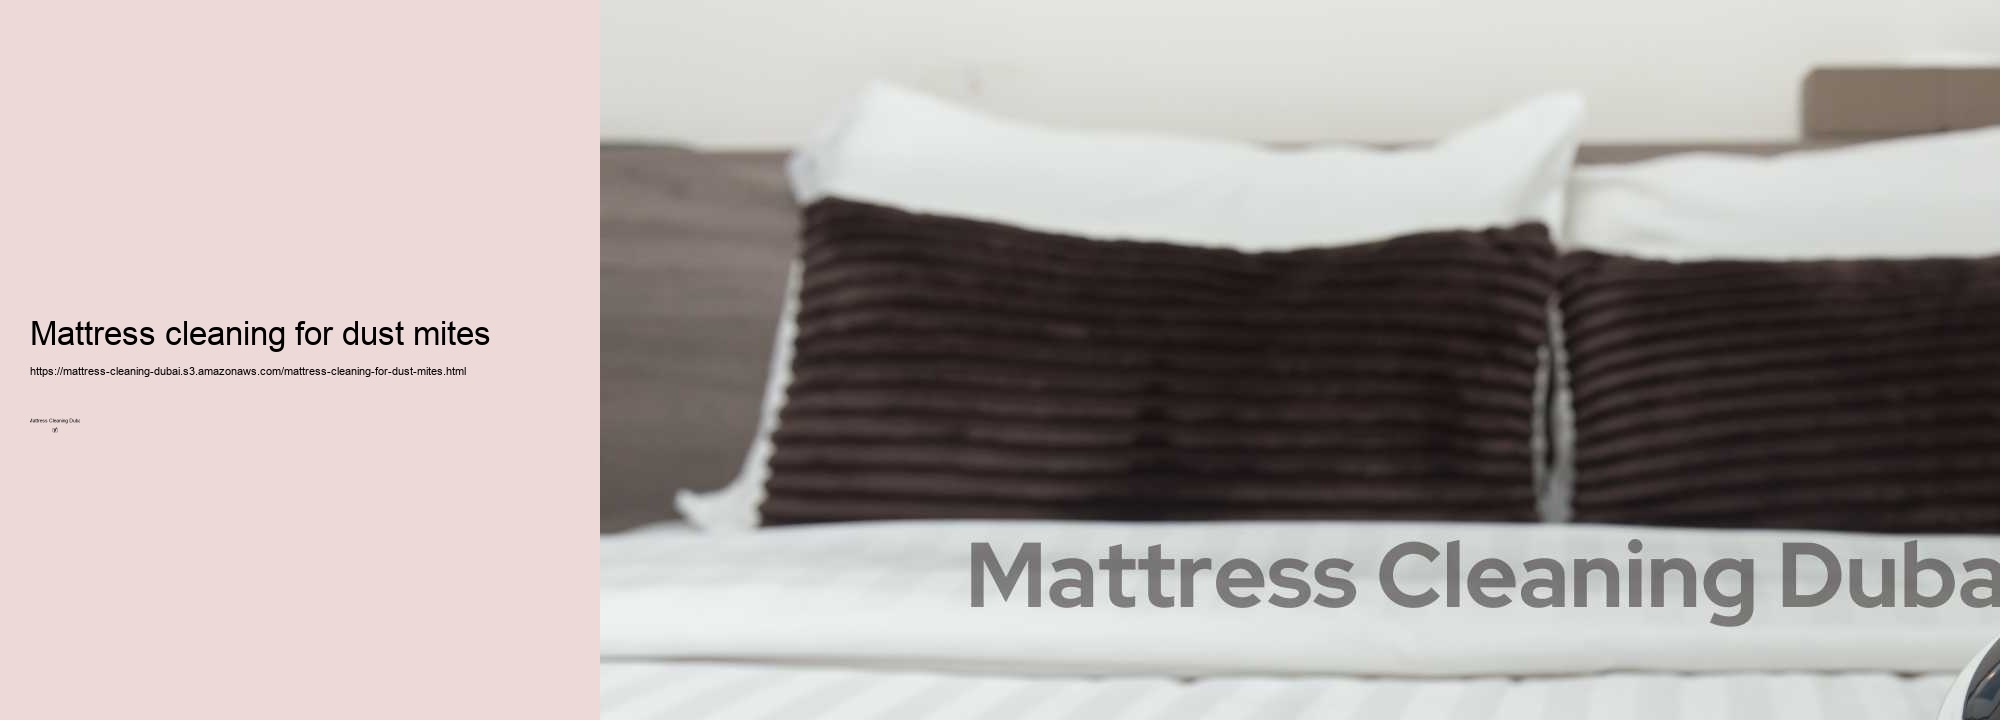 Mattress cleaning for dust mites